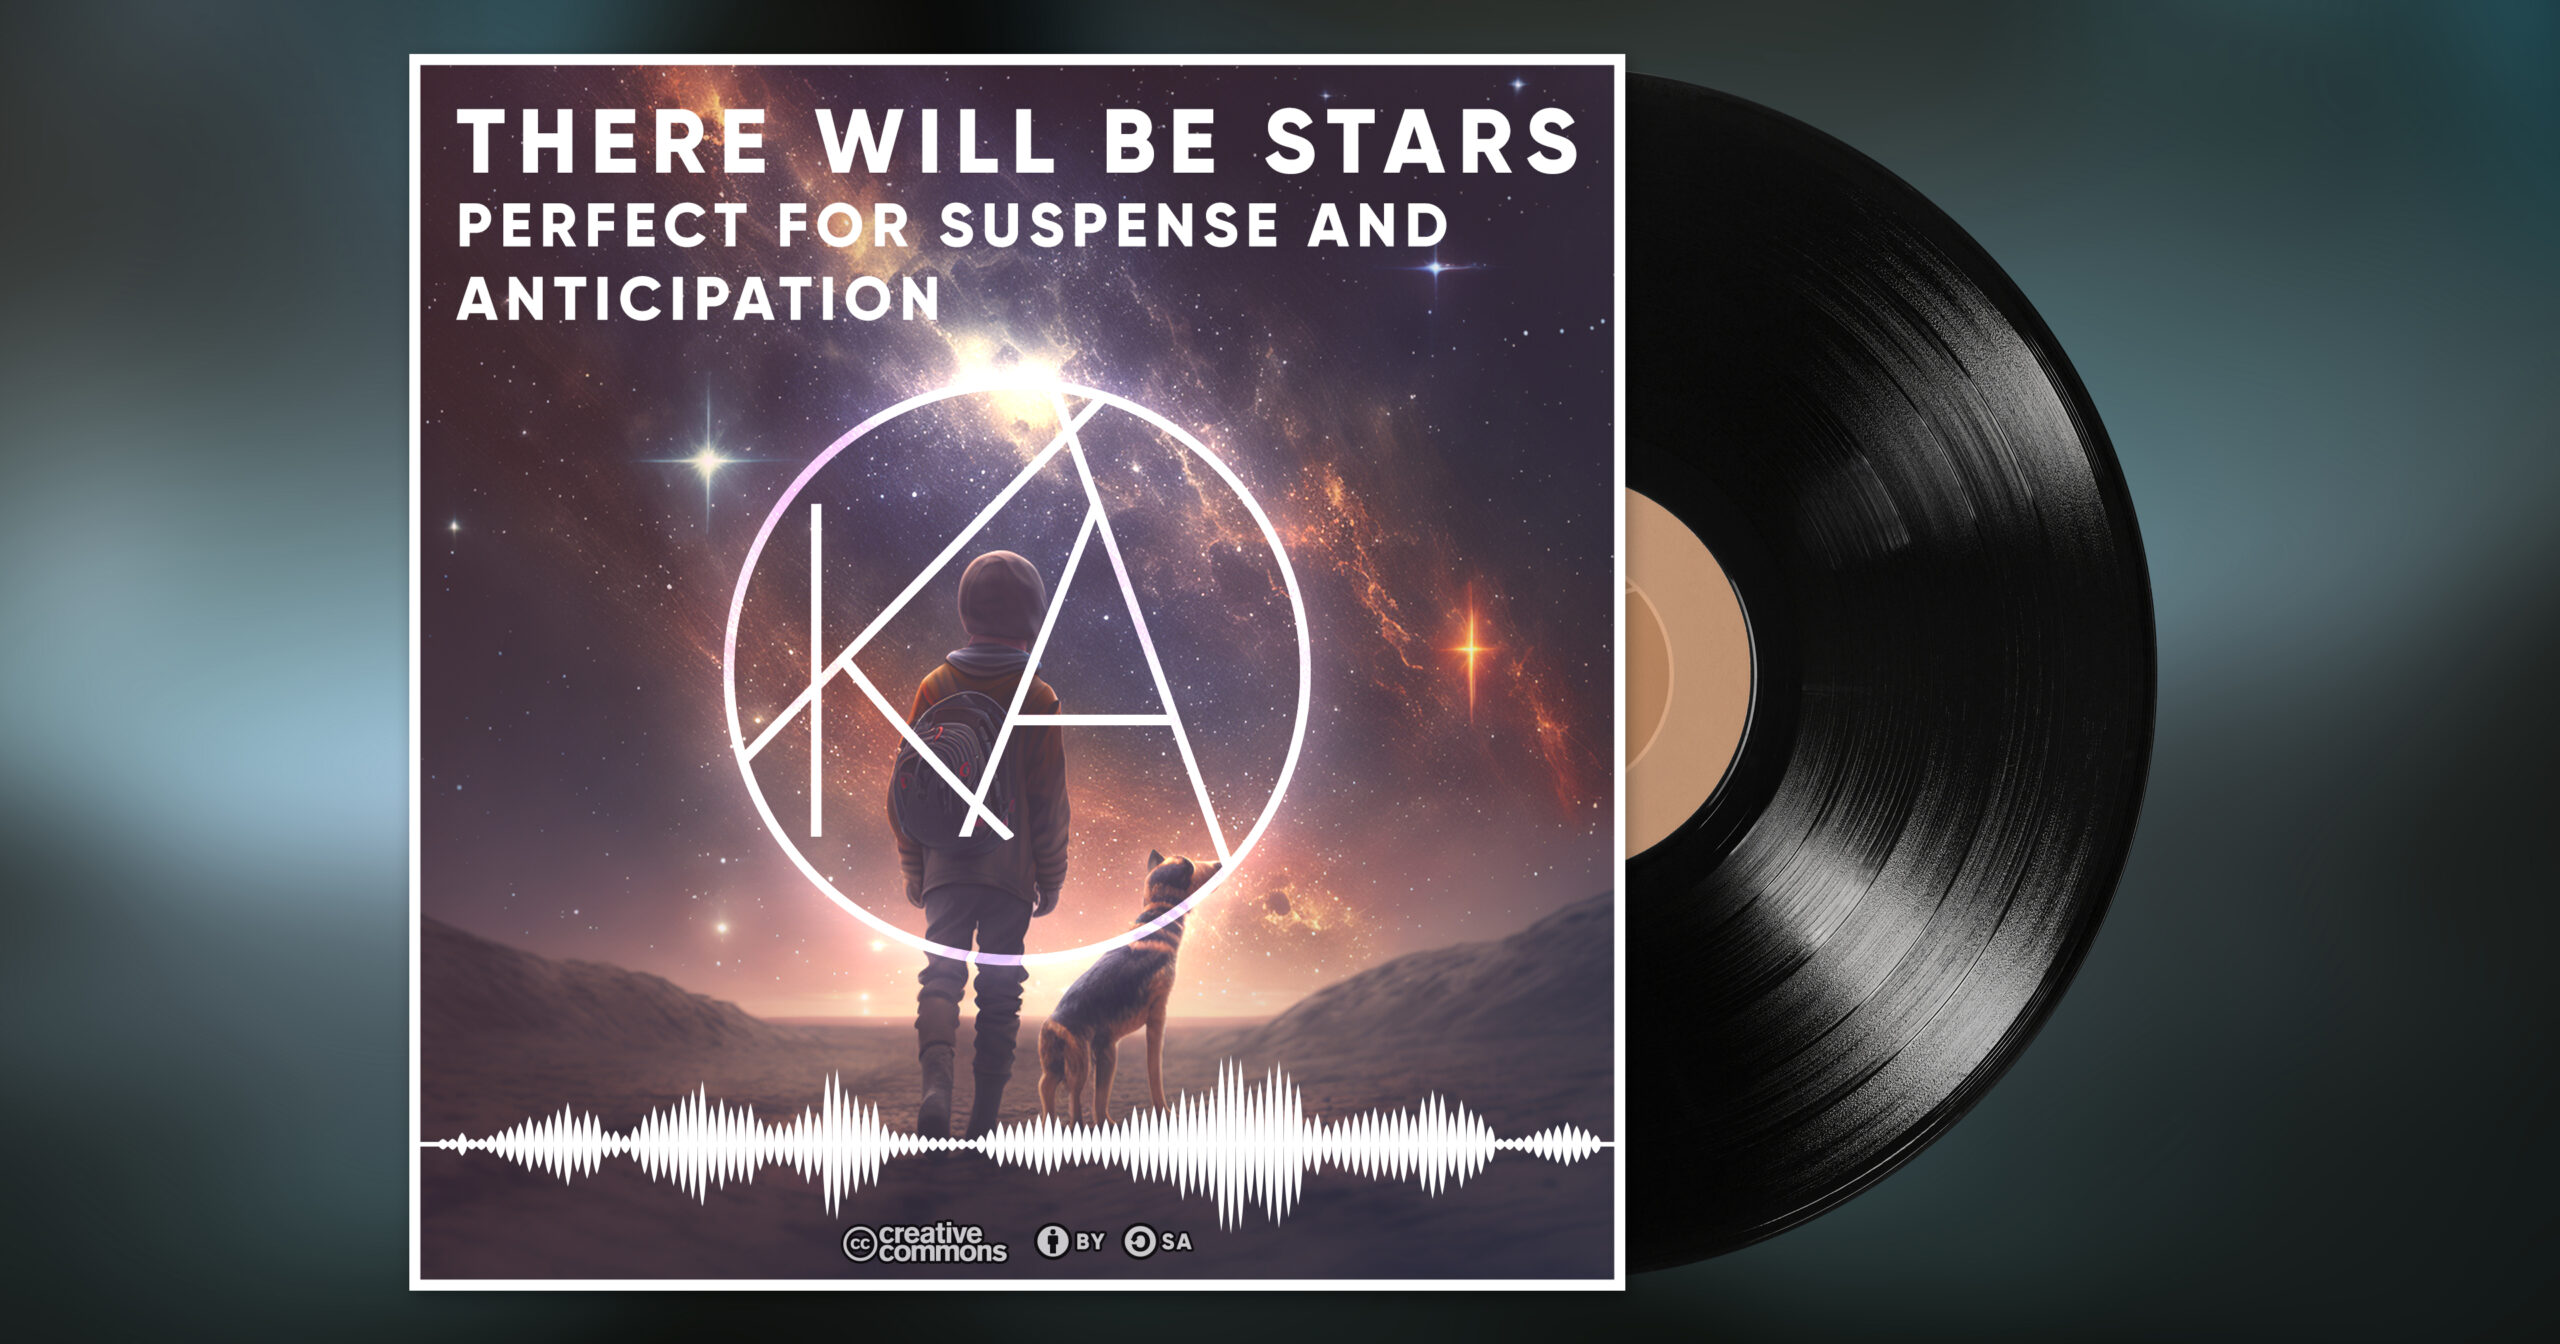 There Will Be Stars is the perfect track to add a touch of suspense and anticipation to your videos, podcasts, and other media.